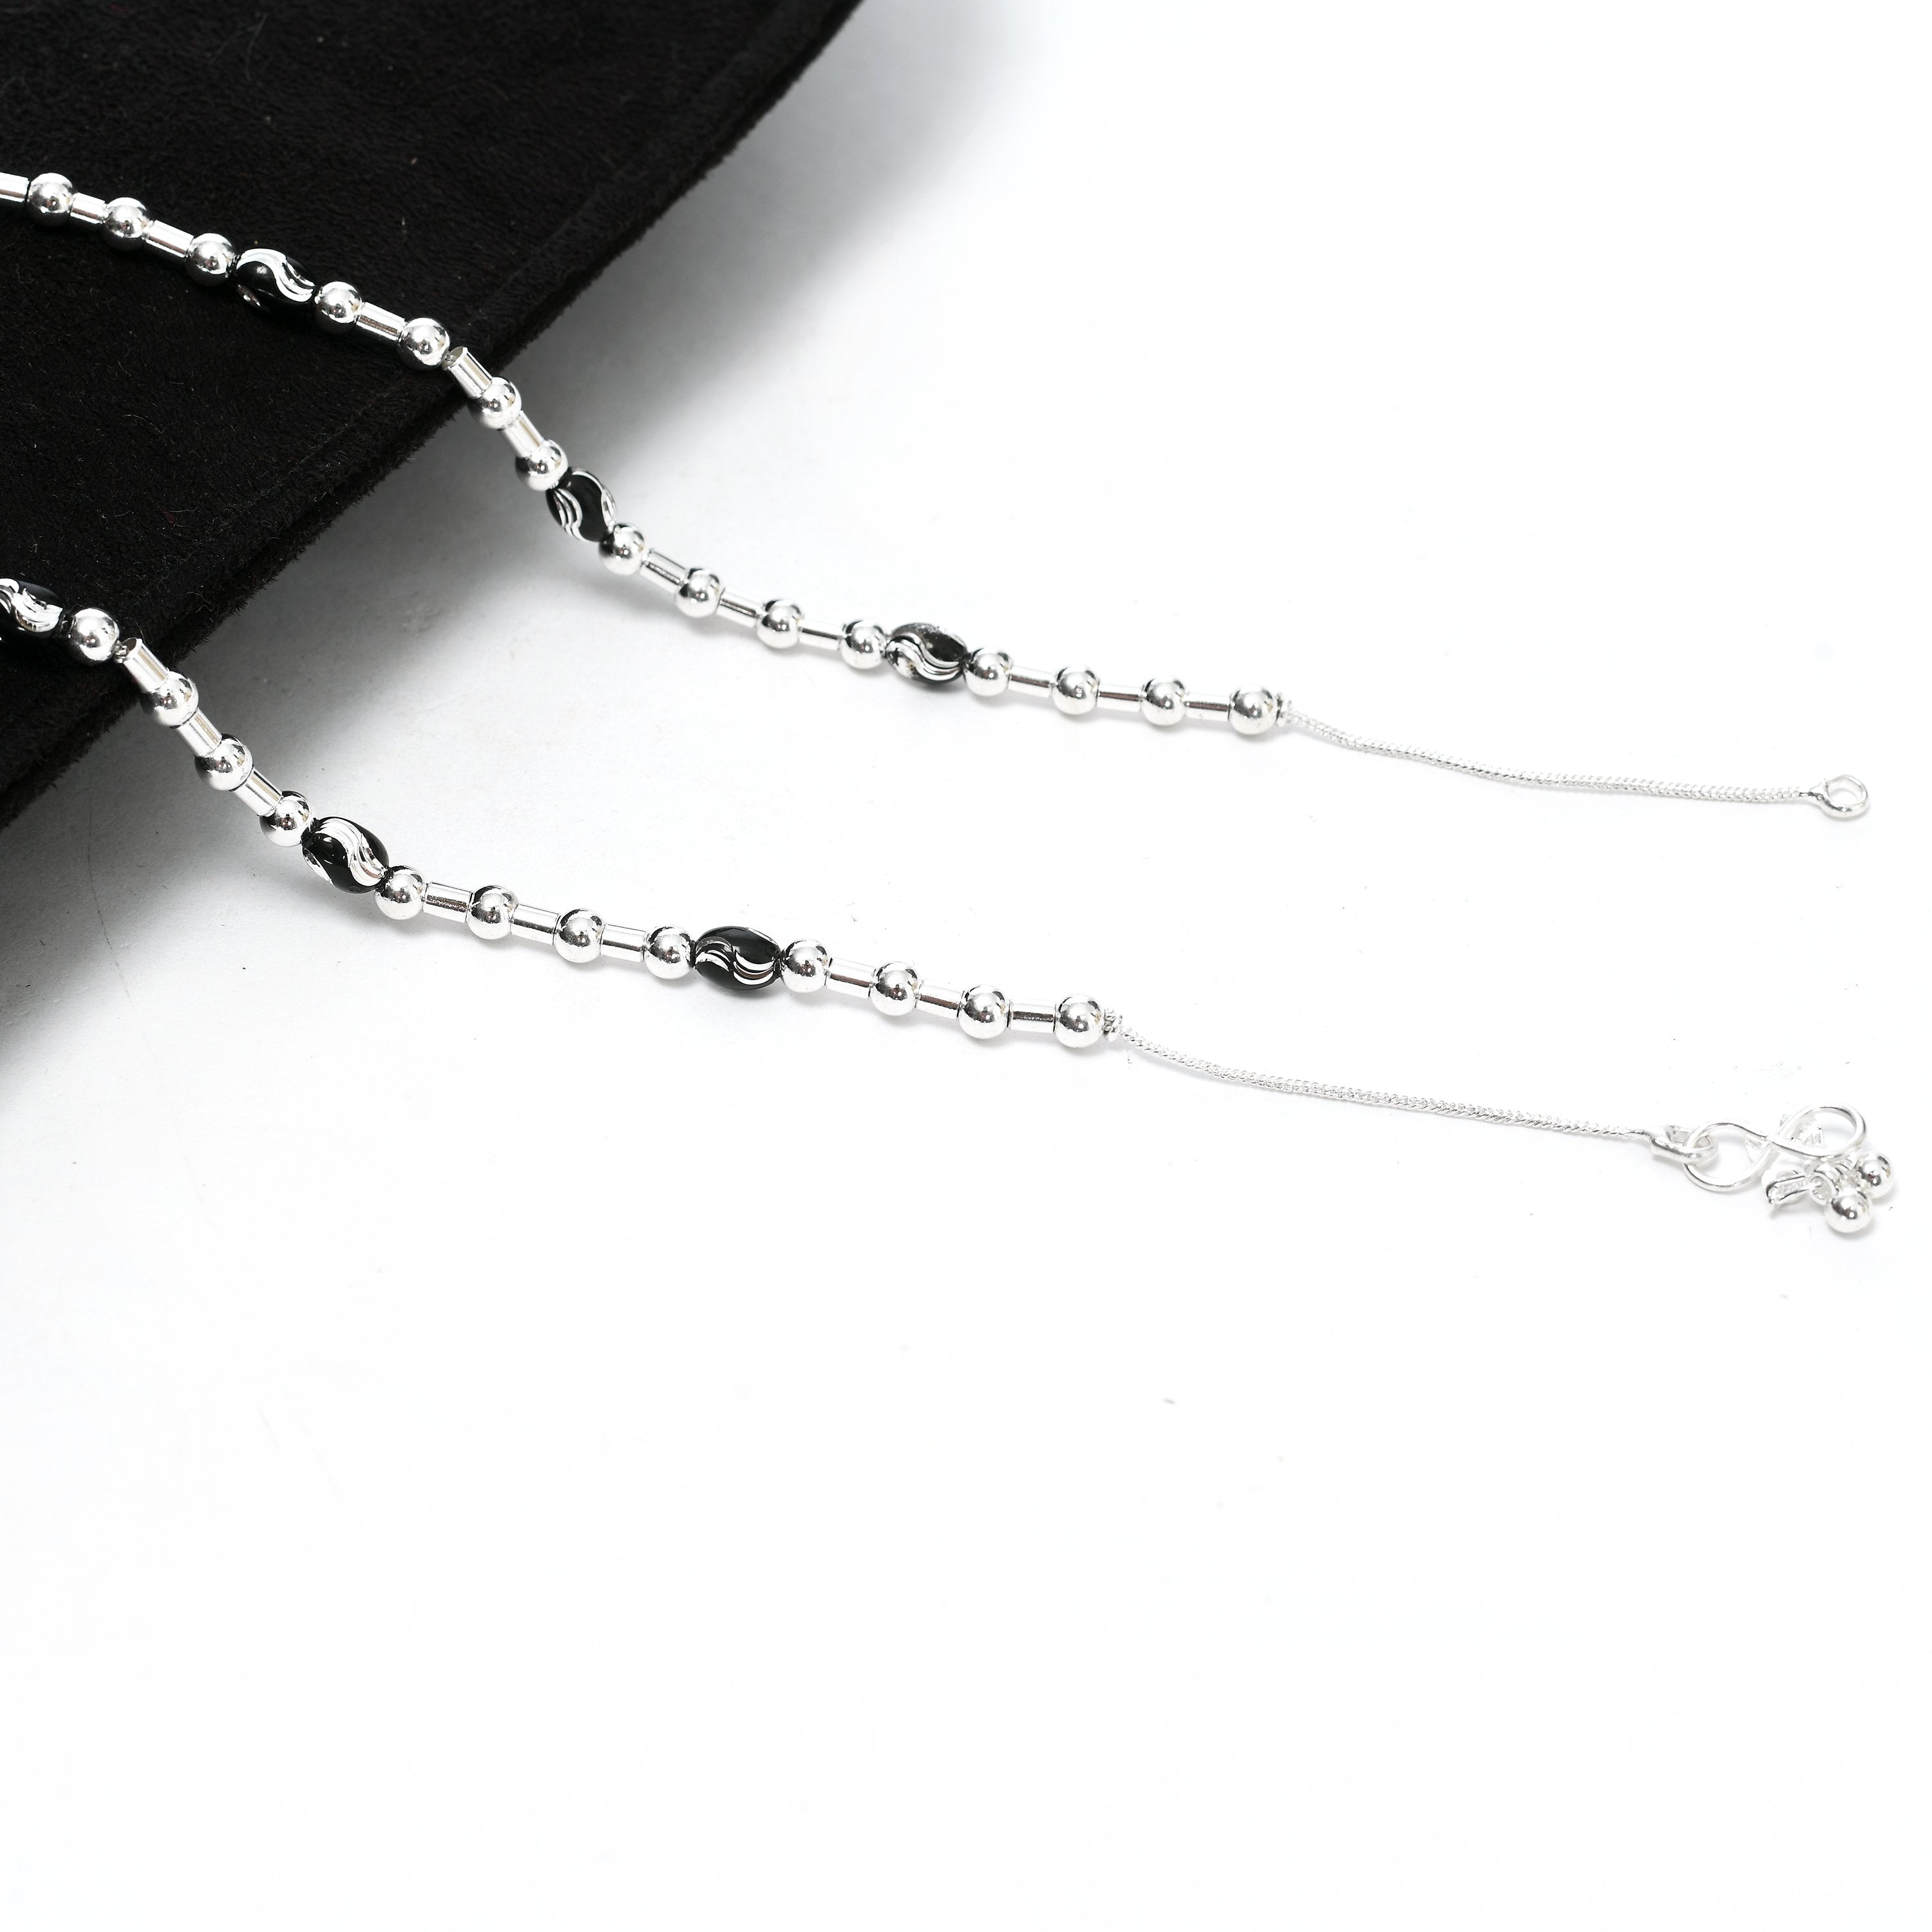 Women's Silver Plated Anklet With Black Beads - Tehzeeb